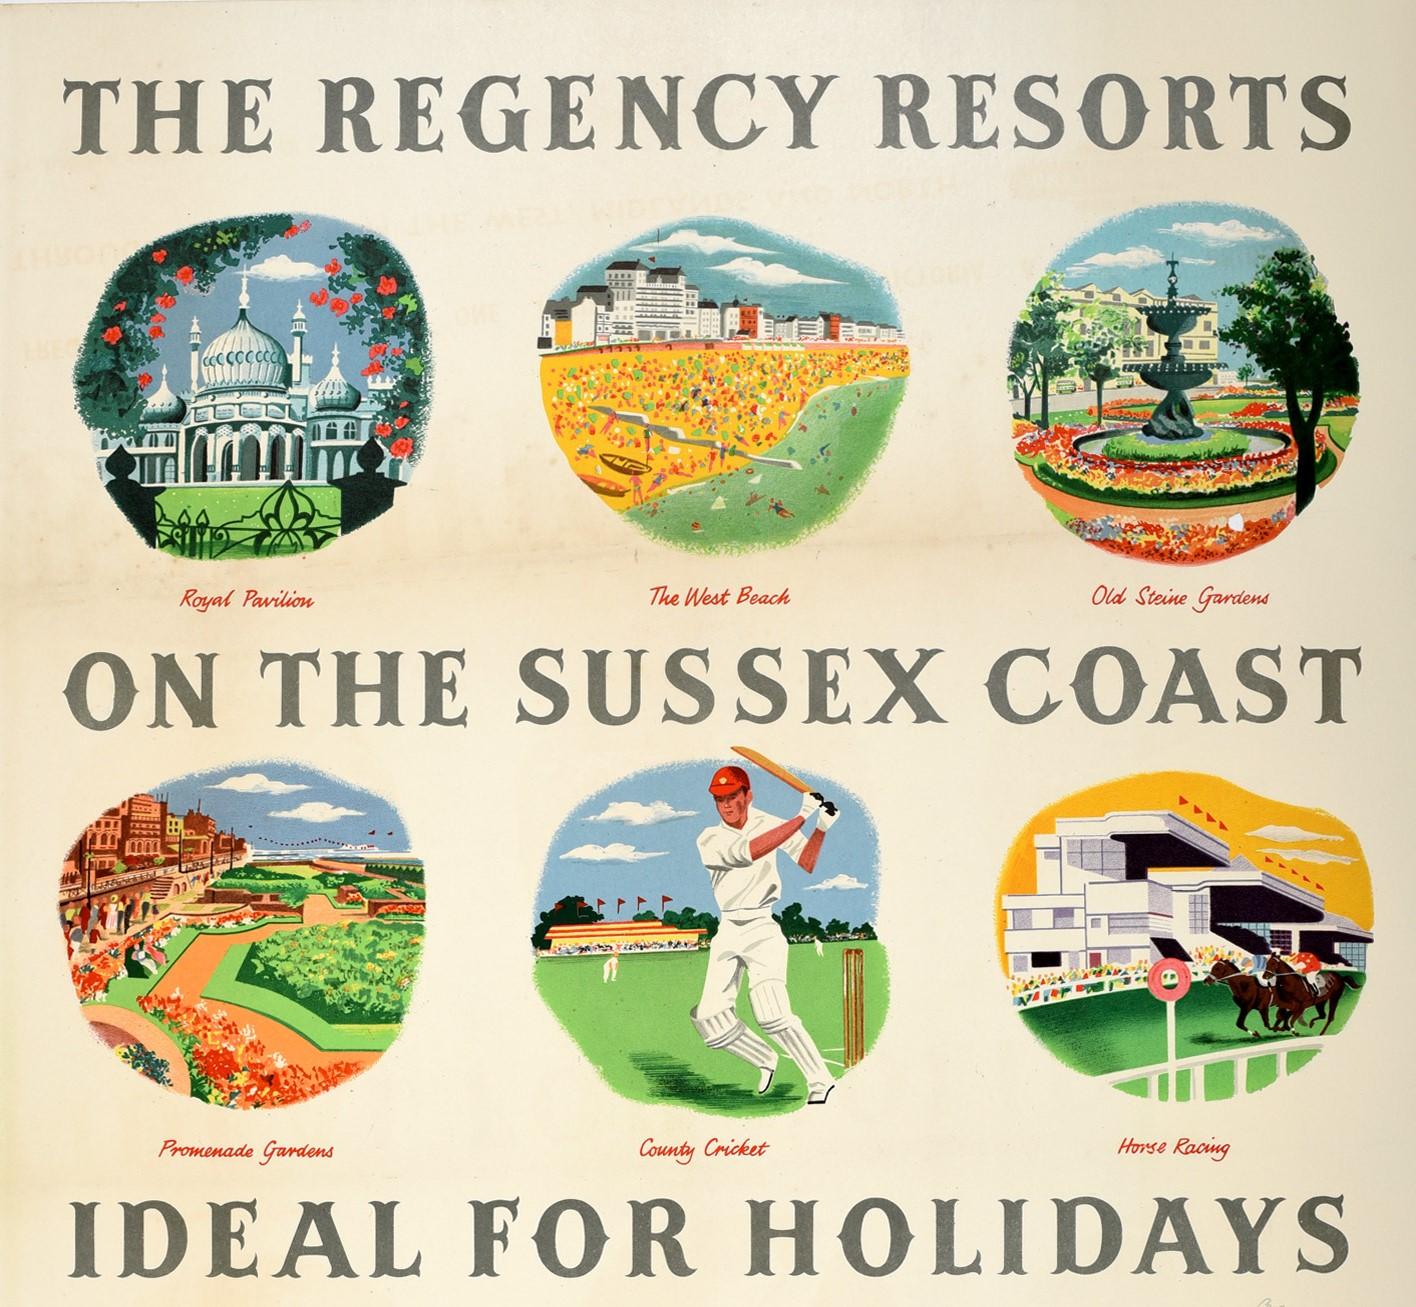 Original vintage British Railways travel poster for The Regency Resorts on the Sussex Coast Ideal for Holidays Brighton & Hove featuring a great design with nine colorful illustrations set between the stylised lettering against a white background